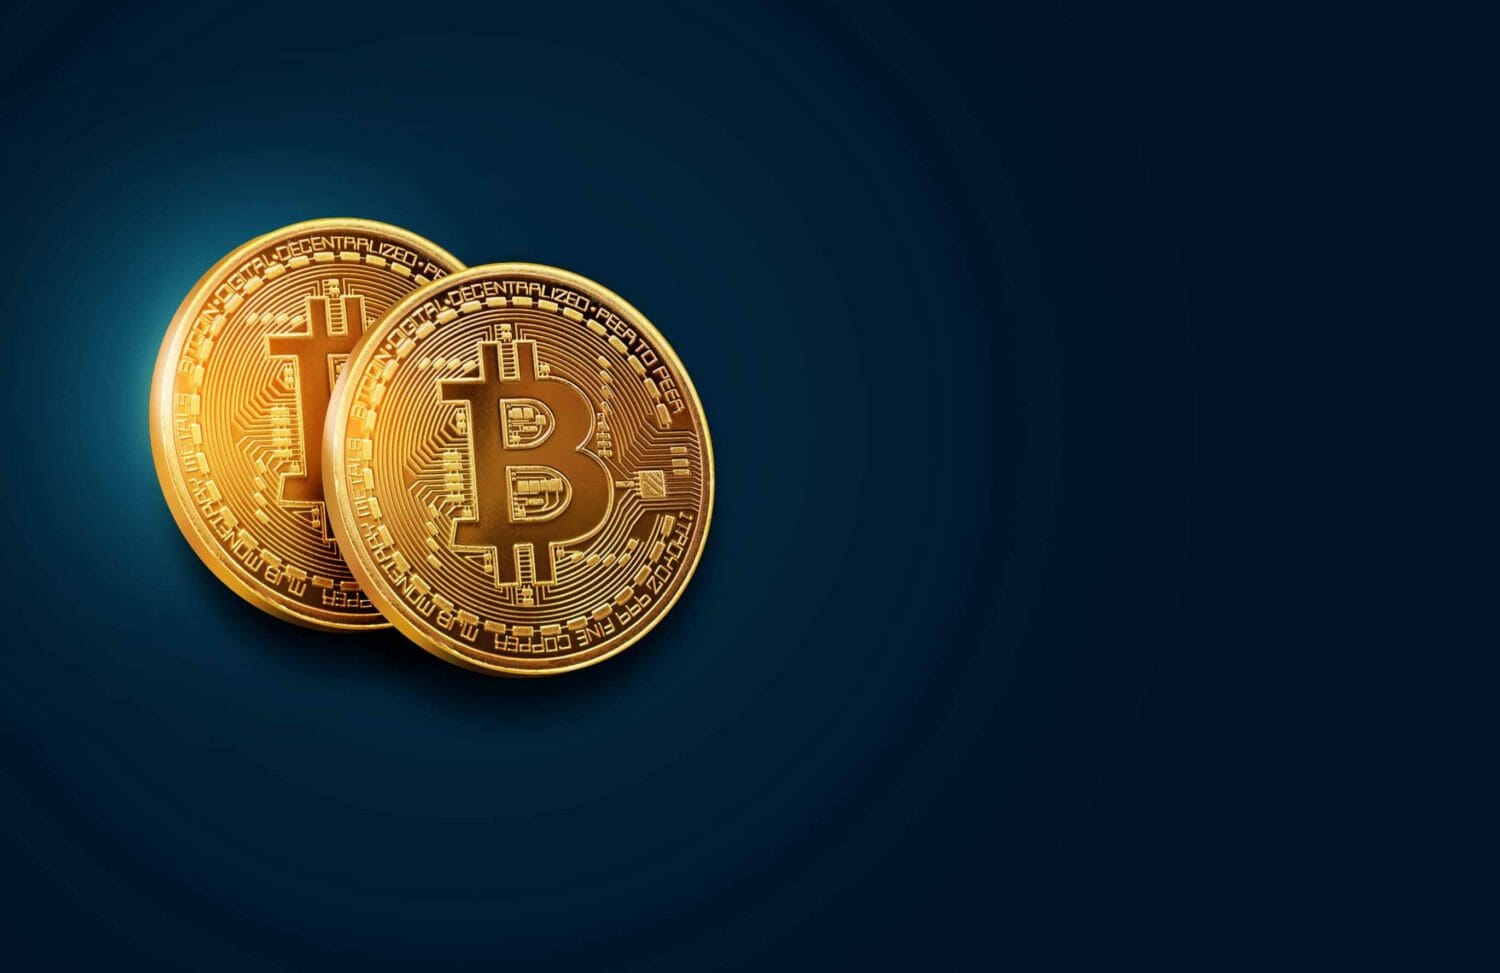 Sometimes Simple Is Better. Check Out This Bitcoin On Blue Cryptocurrency Wallpaper.